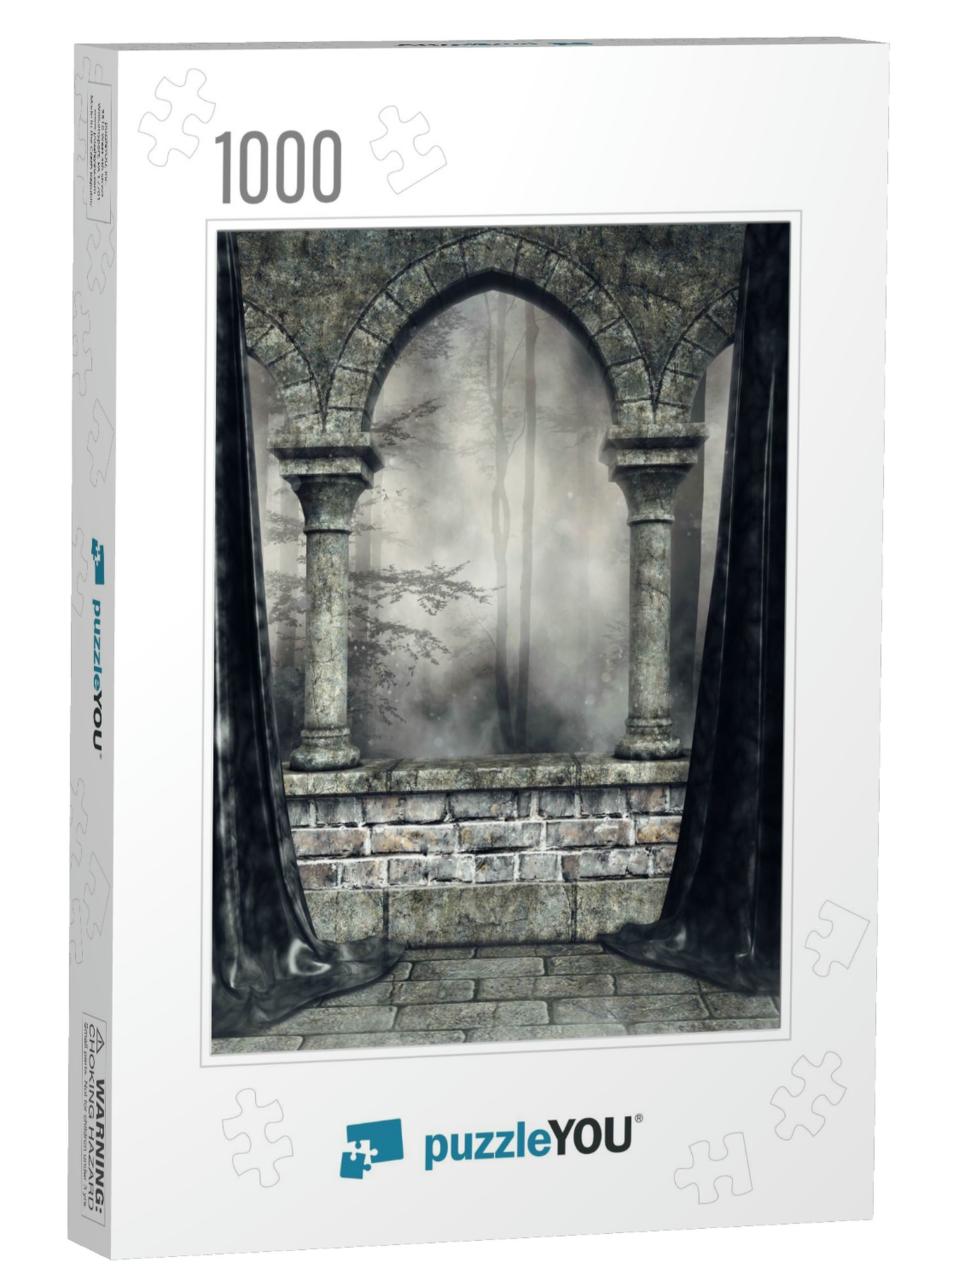 Dark Scenery with a Stone Gothic Arch & Black Curtains. 3... Jigsaw Puzzle with 1000 pieces